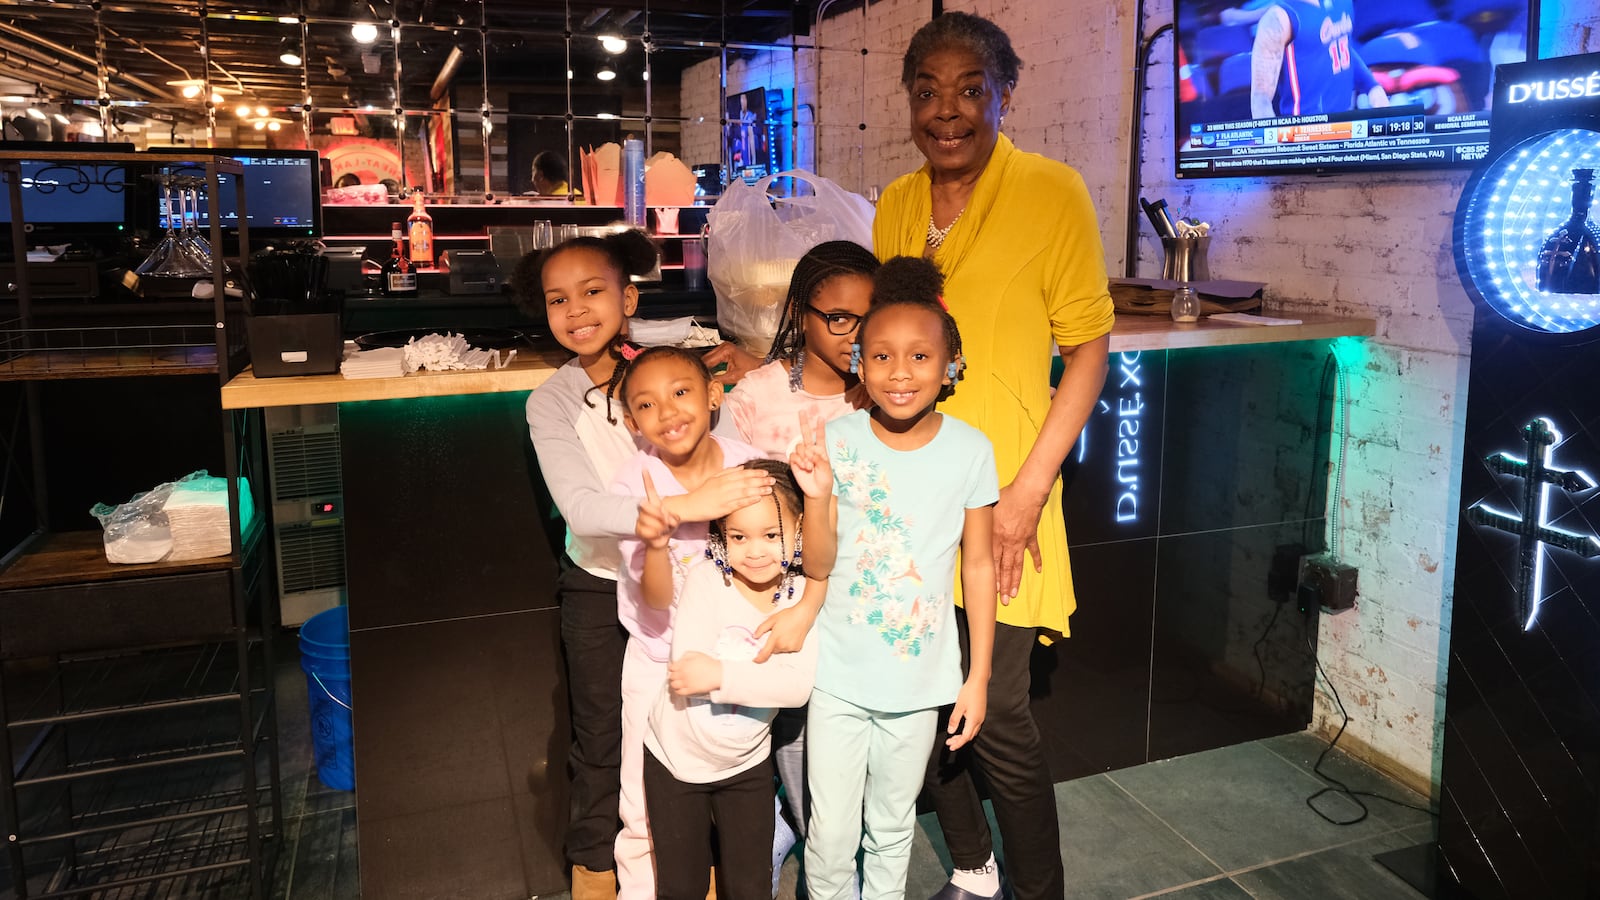 An older woman wearing a yellow shirt poses for a portrait with five young girls in the room of a restaurant with a tv on the wall.